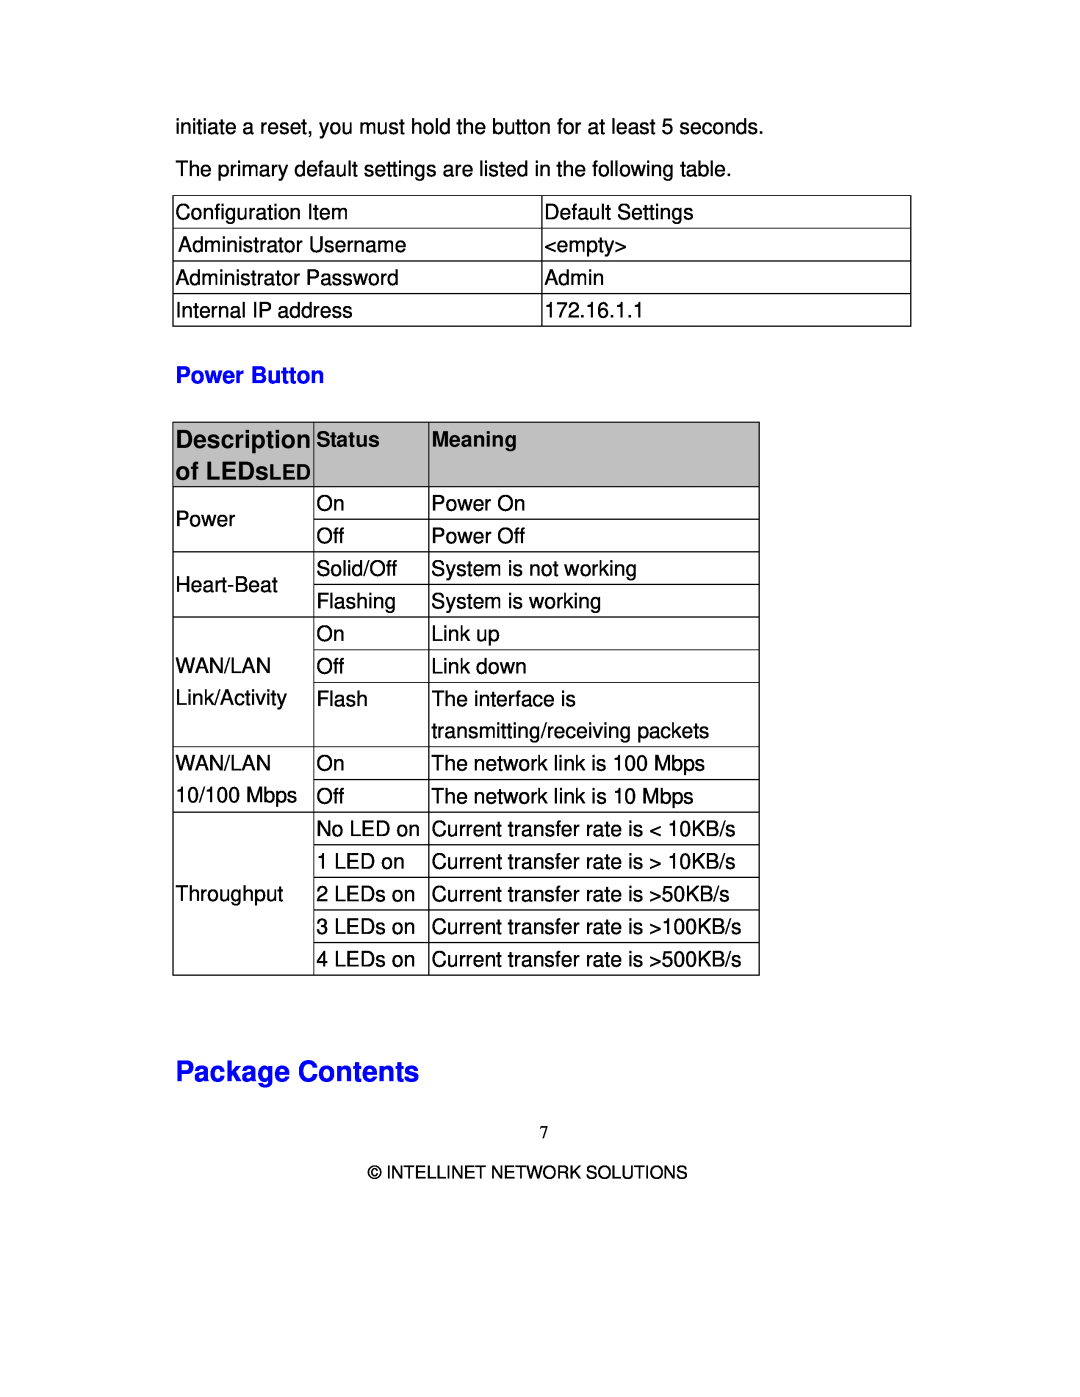 Intellinet Network Solutions 501705 manual Package Contents, Power Button, Status, Meaning, Description, of LEDsLED 